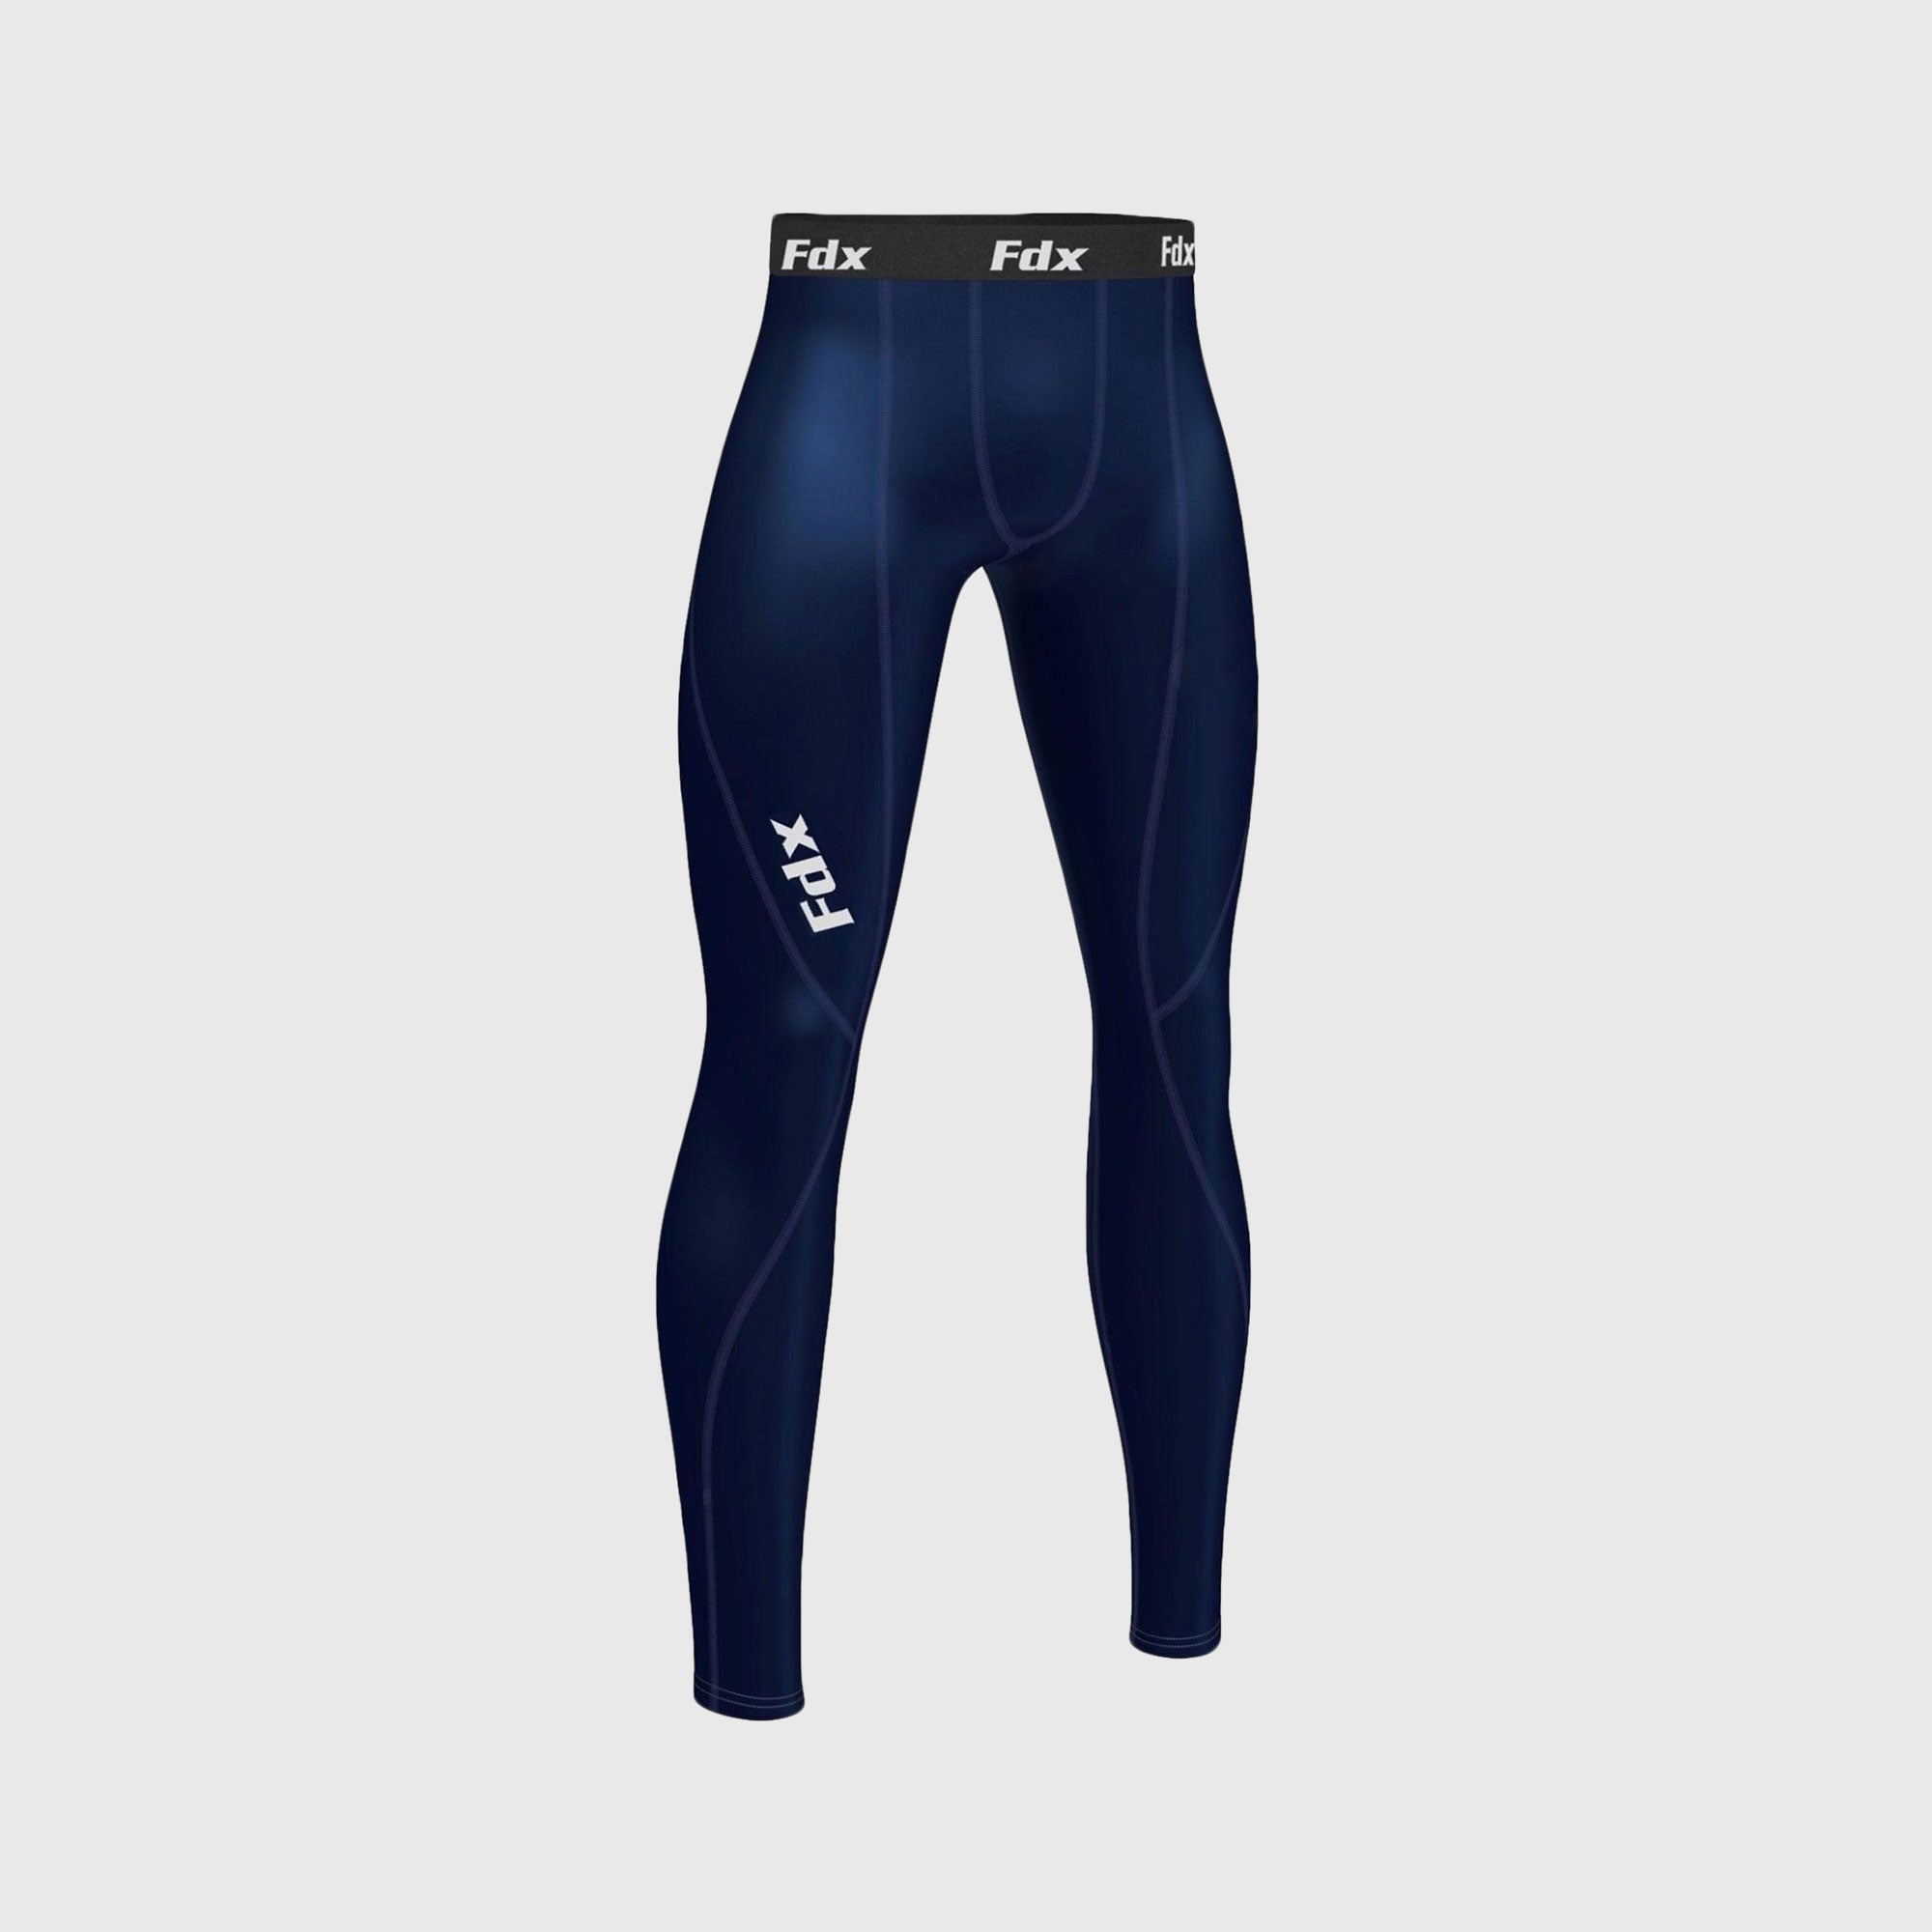 Fdx Navy Blue Compression Tights Leggings Gym Workout Running Athletic Yoga Elastic Waistband Strechable Breathable Training Jogging Pants - Thermolinx